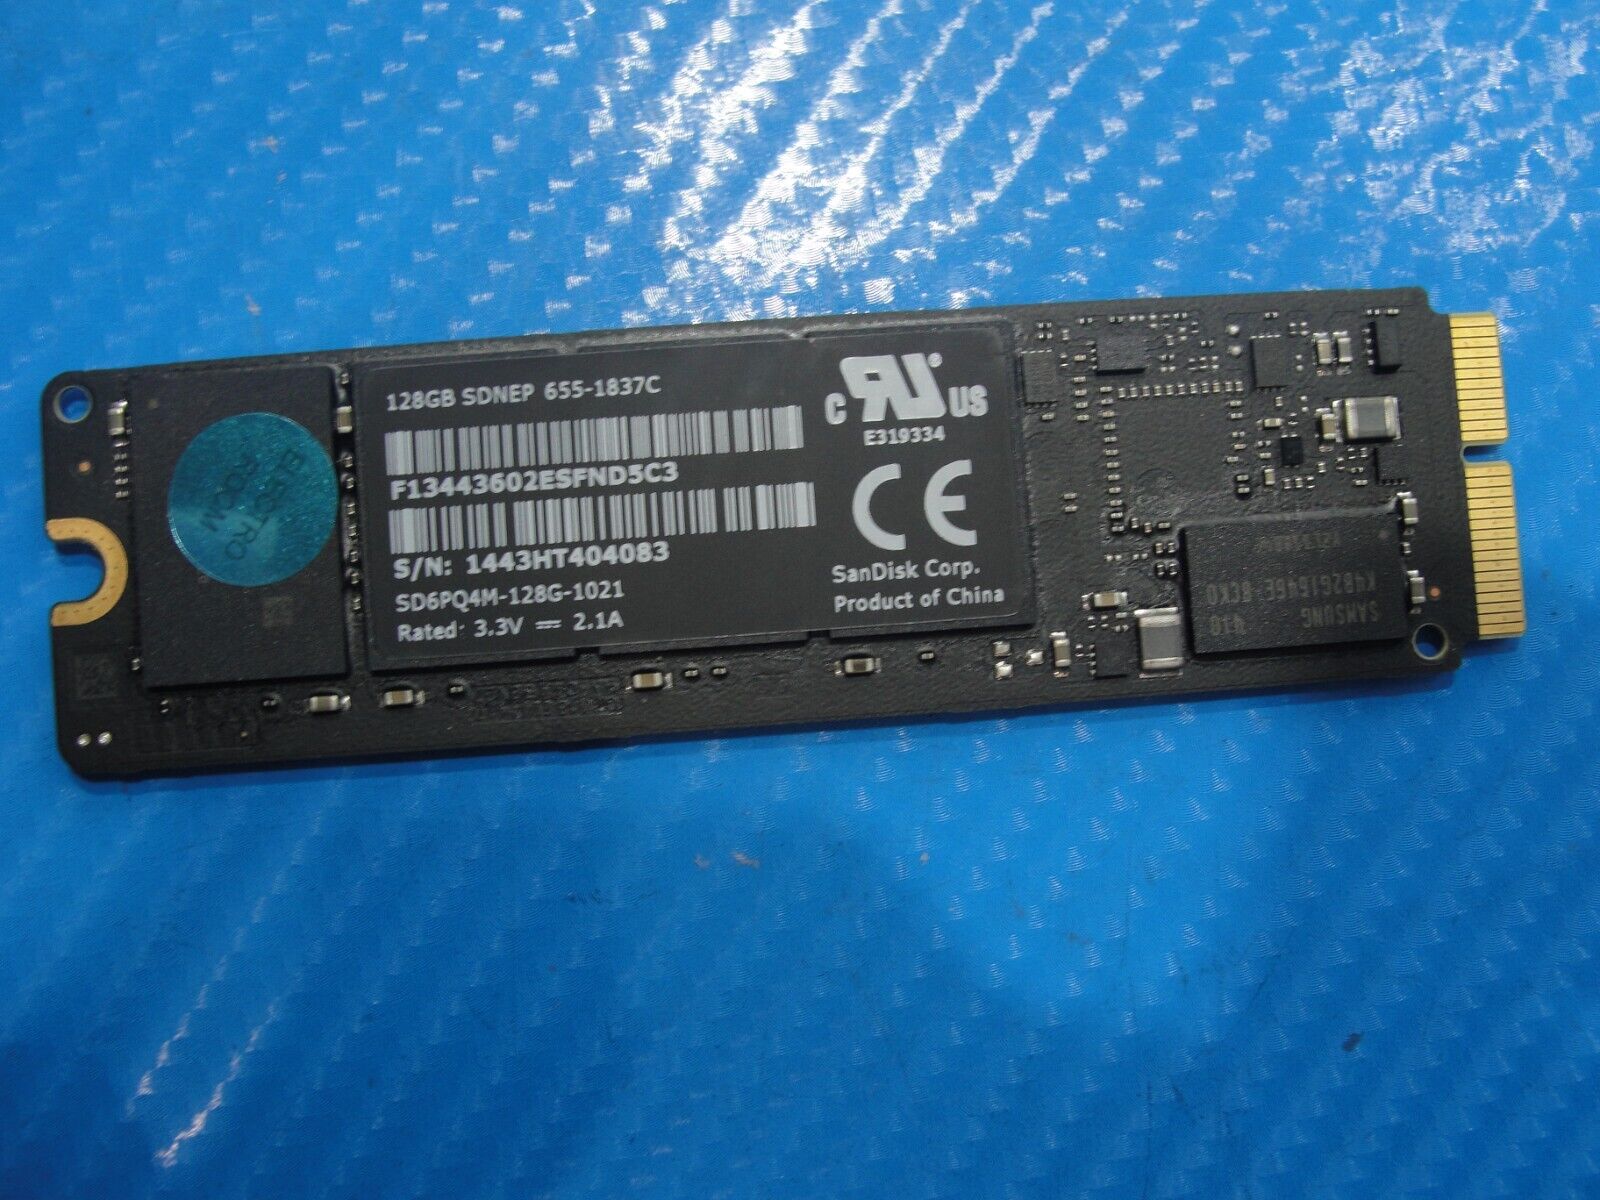 MacBook Air A1466 SanDisk 128GB SSD Solid State Drive SD6PQ4M-128G-1021 661-7456